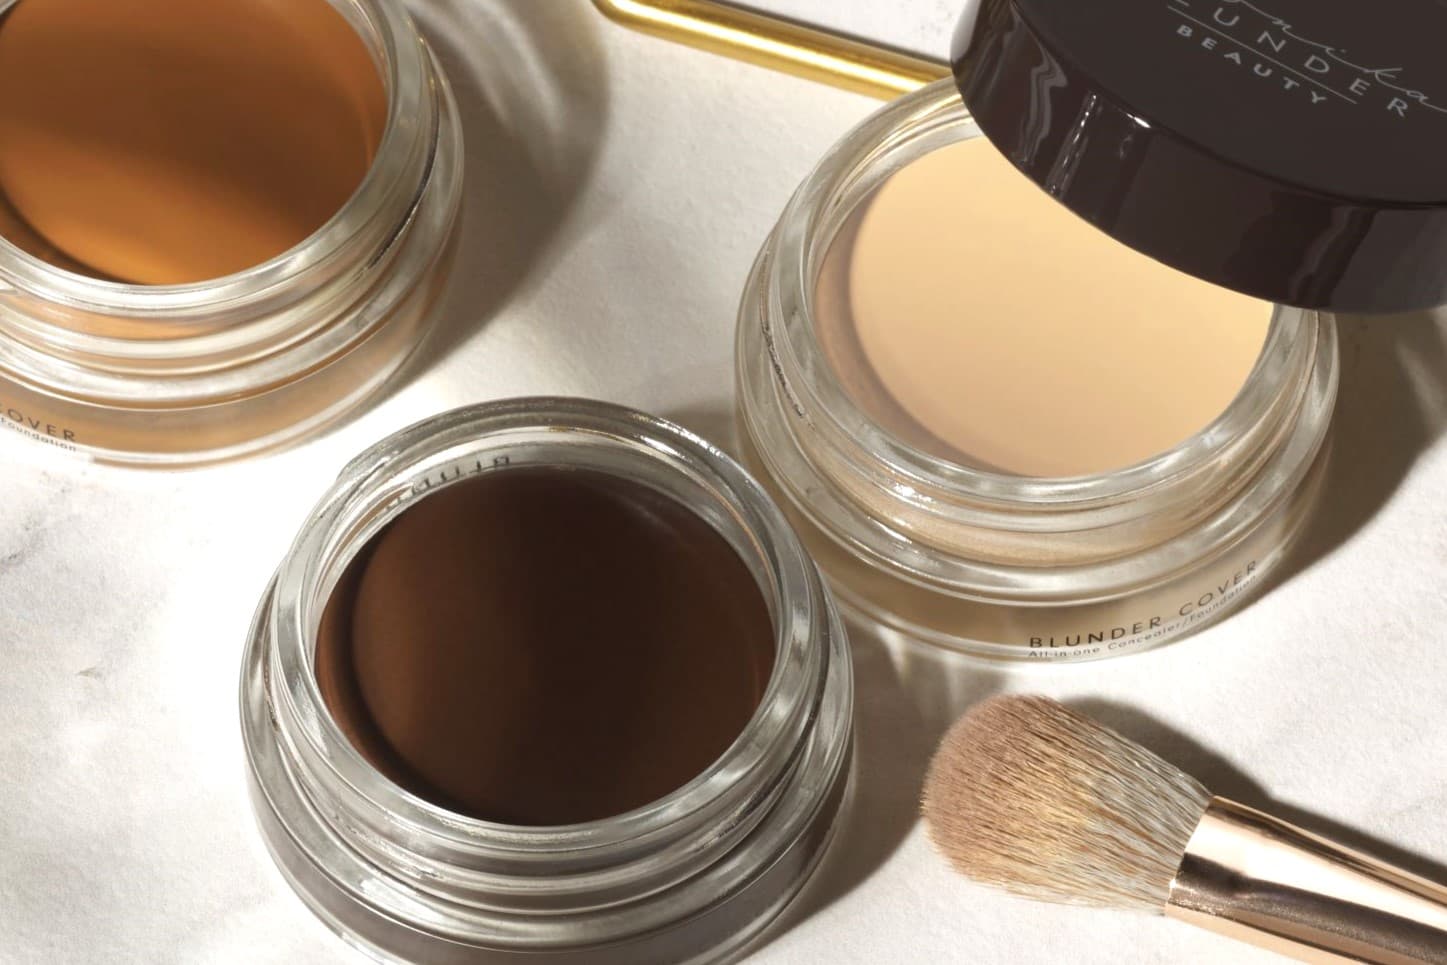 Space NK's Beauty Editor Reviews The Monika Blunder Foundation